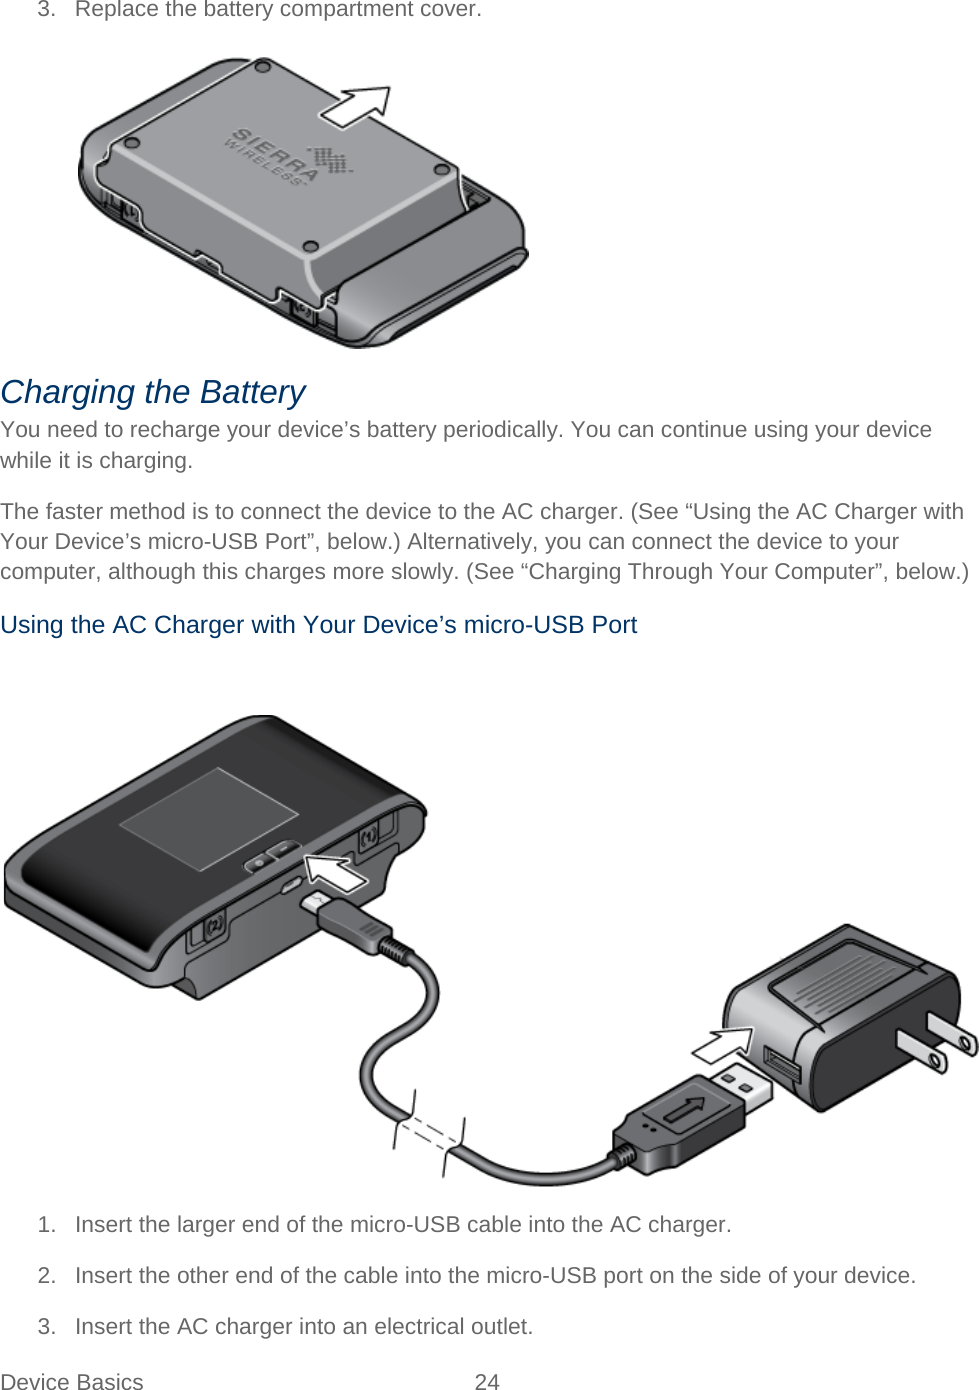 Device Basics 24   3. Replace the battery compartment cover.   Charging the Battery You need to recharge your device’s battery periodically. You can continue using your device while it is charging. The faster method is to connect the device to the AC charger. (See “Using the AC Charger with Your Device’s micro-USB Port”, below.) Alternatively, you can connect the device to your computer, although this charges more slowly. (See “Charging Through Your Computer”, below.) Using the AC Charger with Your Device’s micro-USB Port   1. Insert the larger end of the micro-USB cable into the AC charger. 2. Insert the other end of the cable into the micro-USB port on the side of your device. 3. Insert the AC charger into an electrical outlet. 